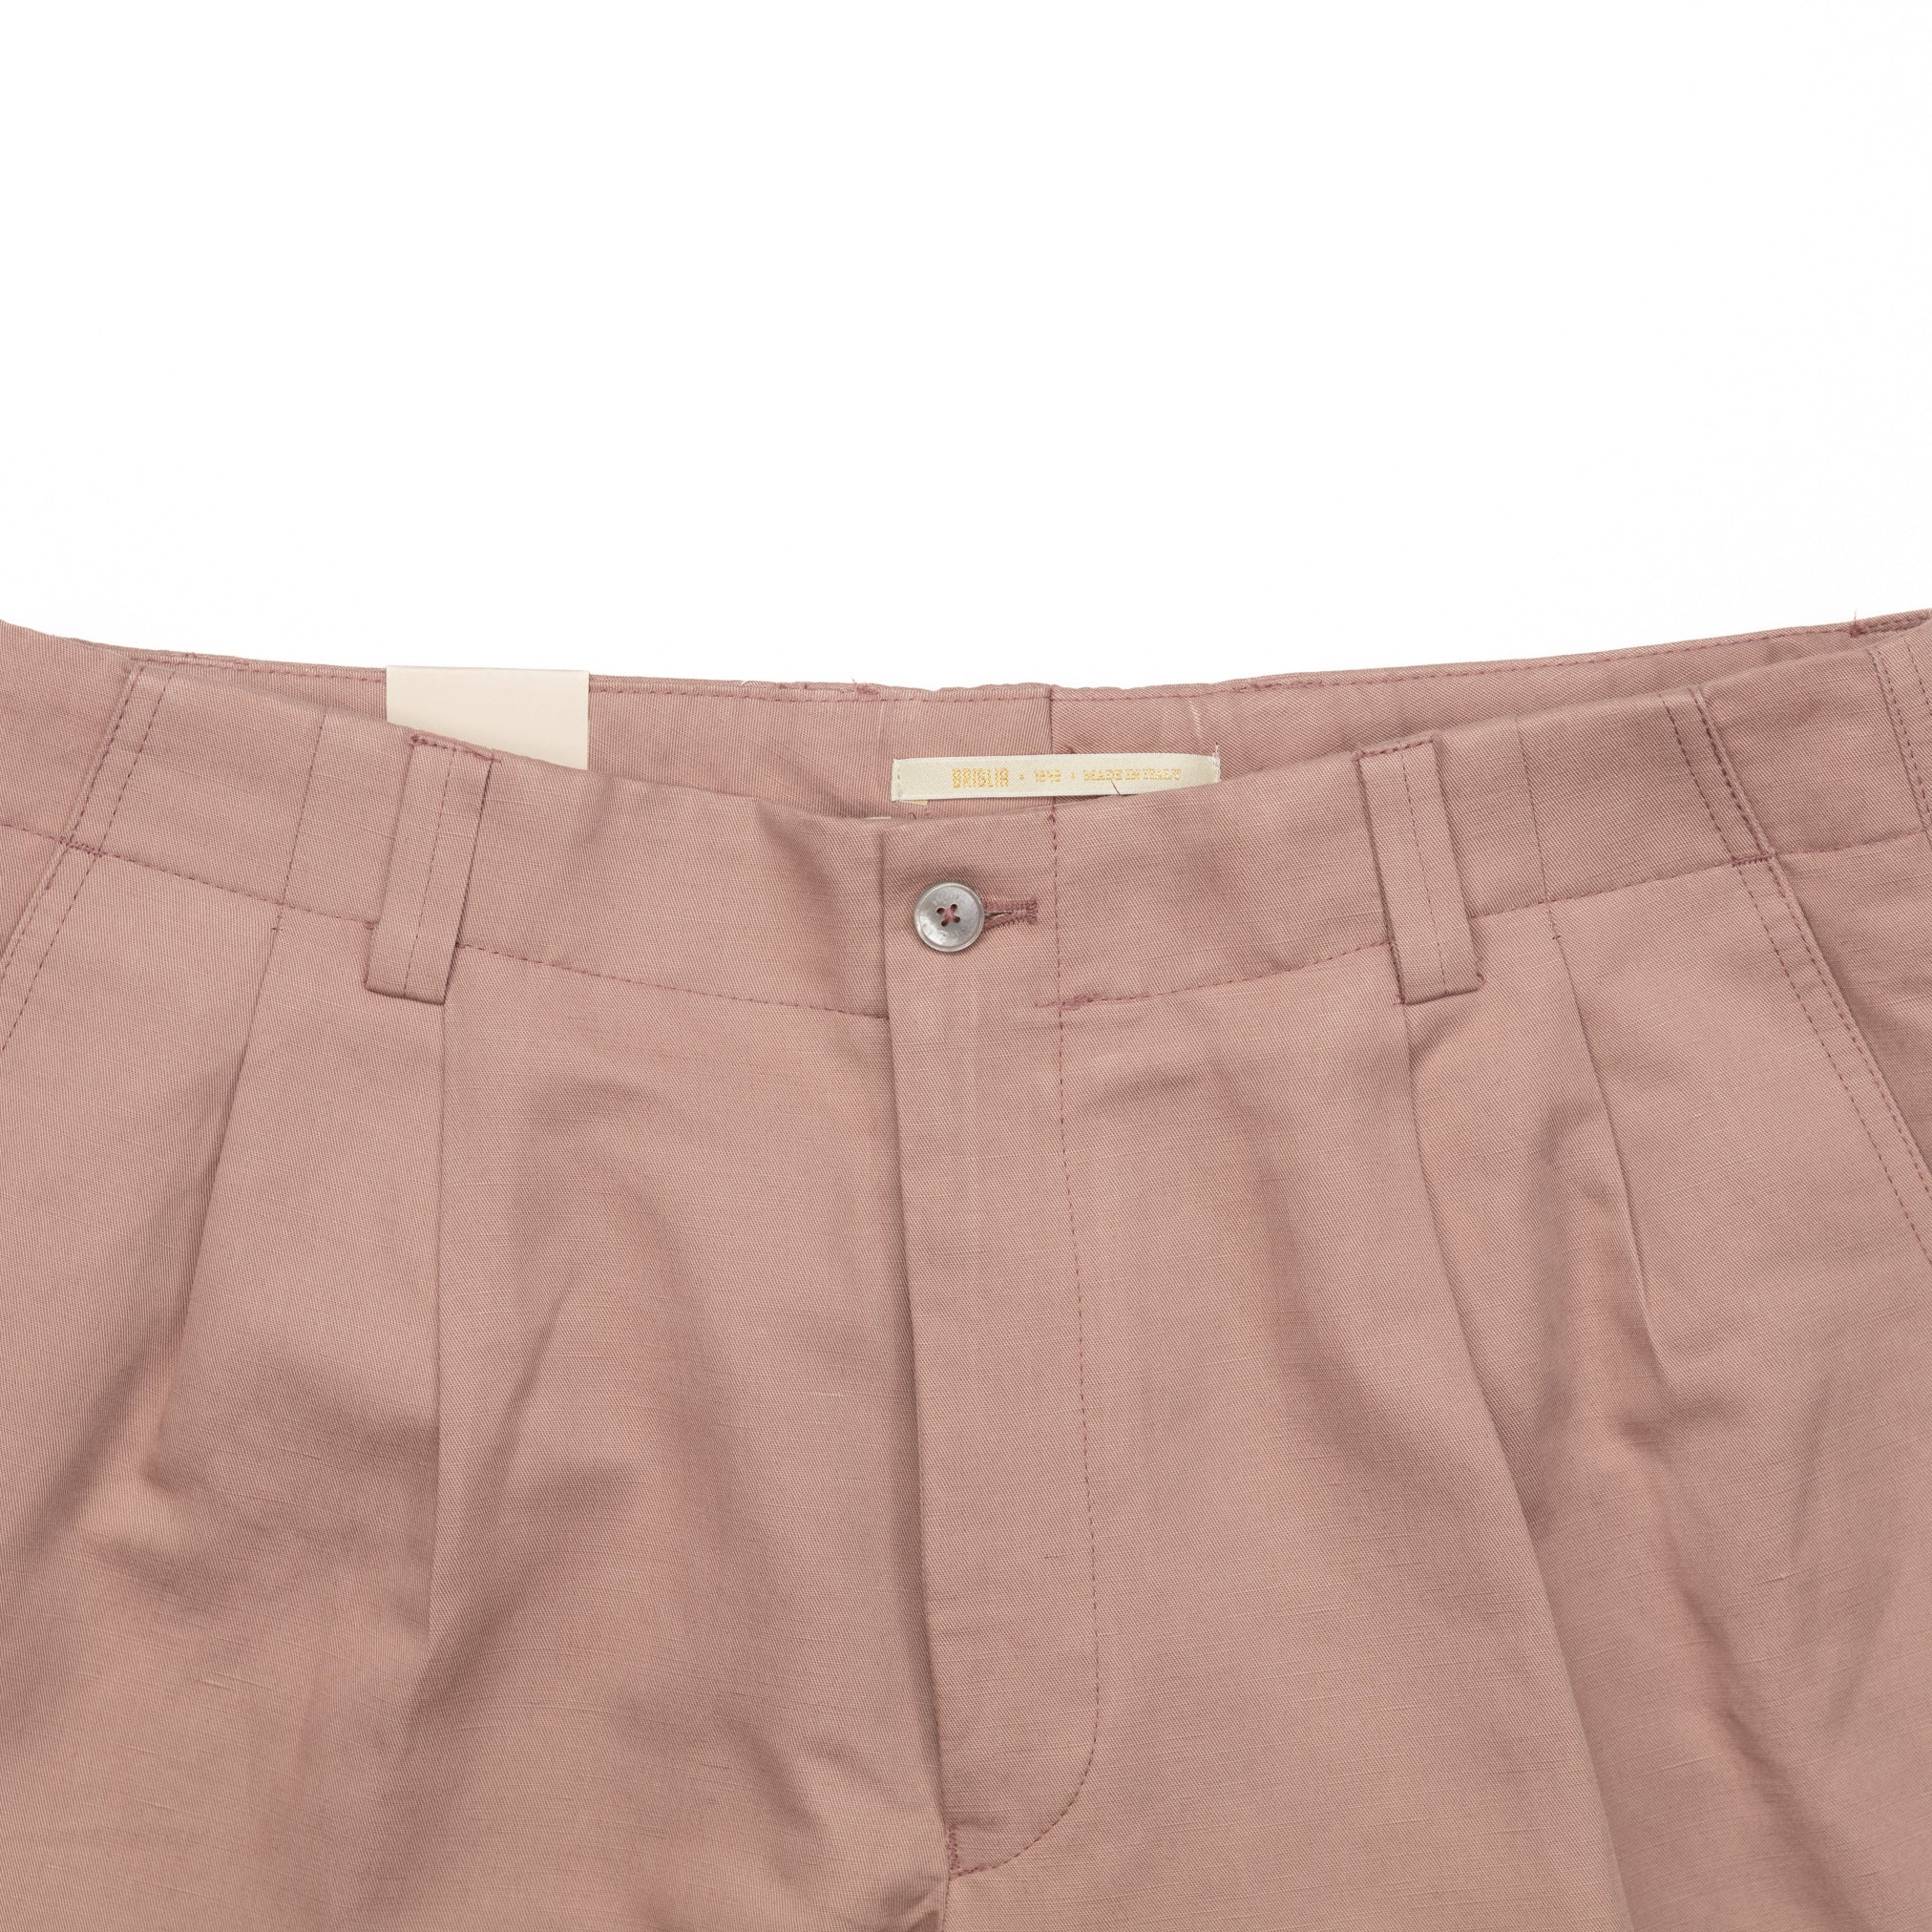 Cardiff Cotton & Linen Pant in Dusty Rose